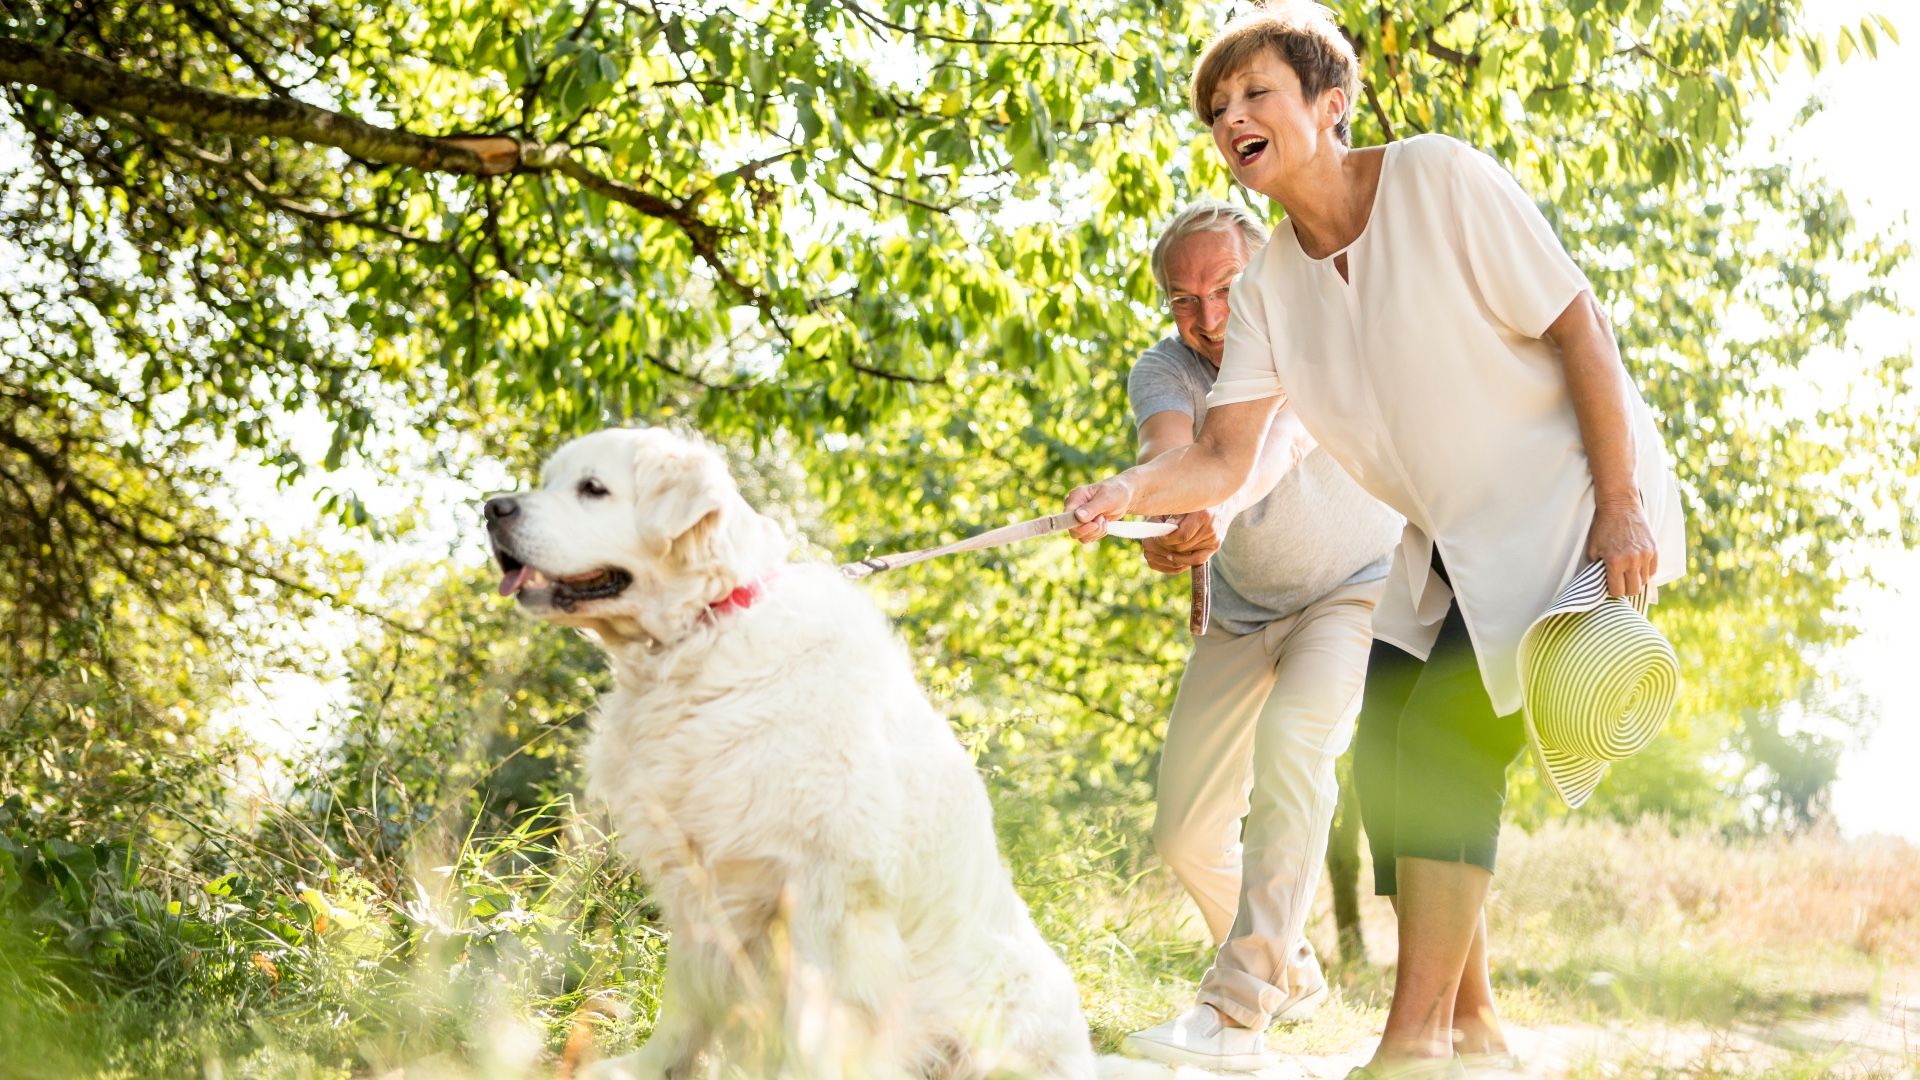 Trainer shares seven of her favorite loose leash walking tips so you ...